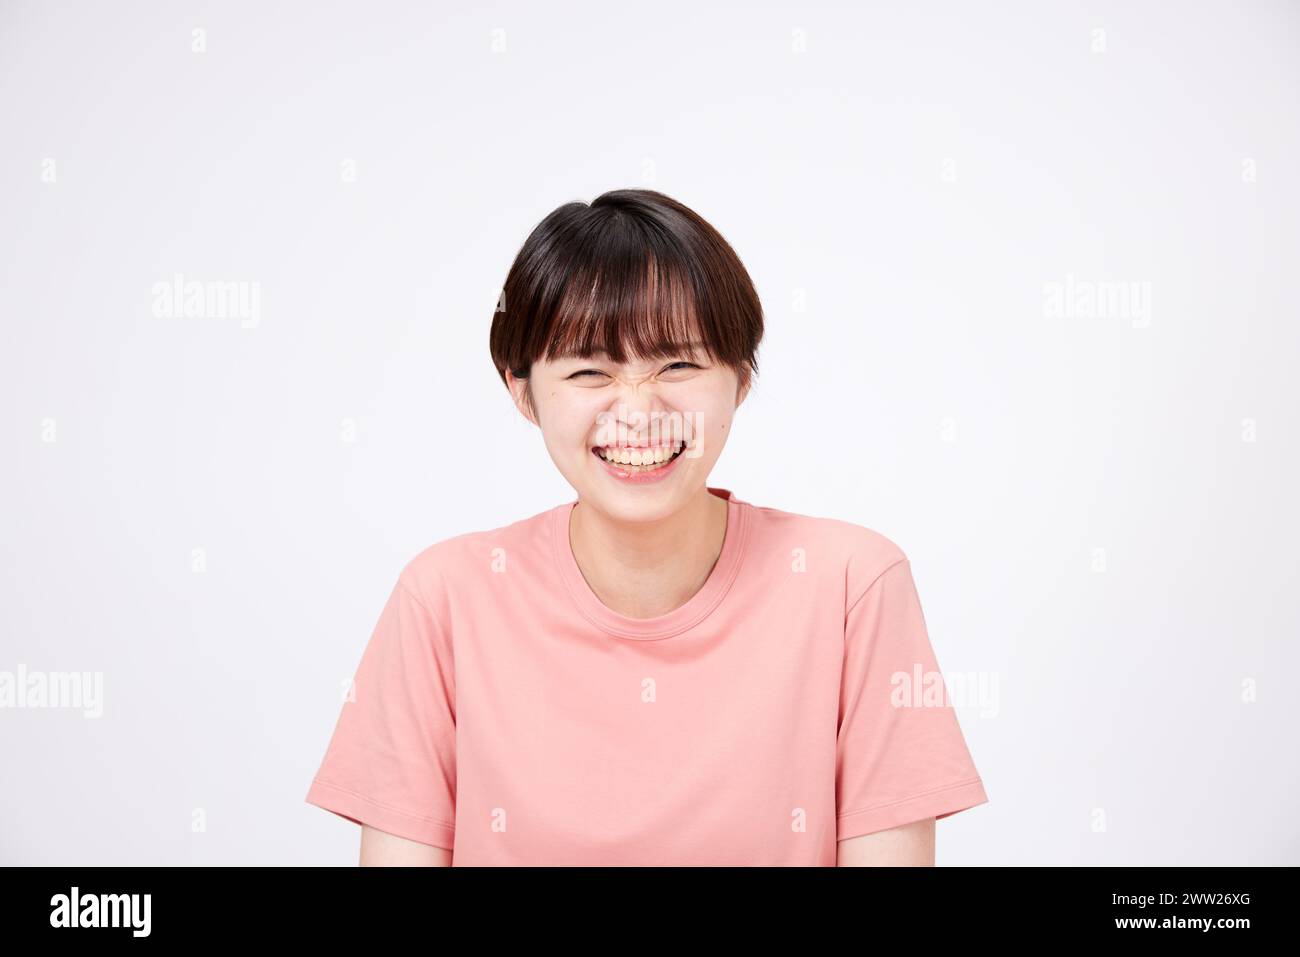 A woman in a pink shirt smiling Stock Photo